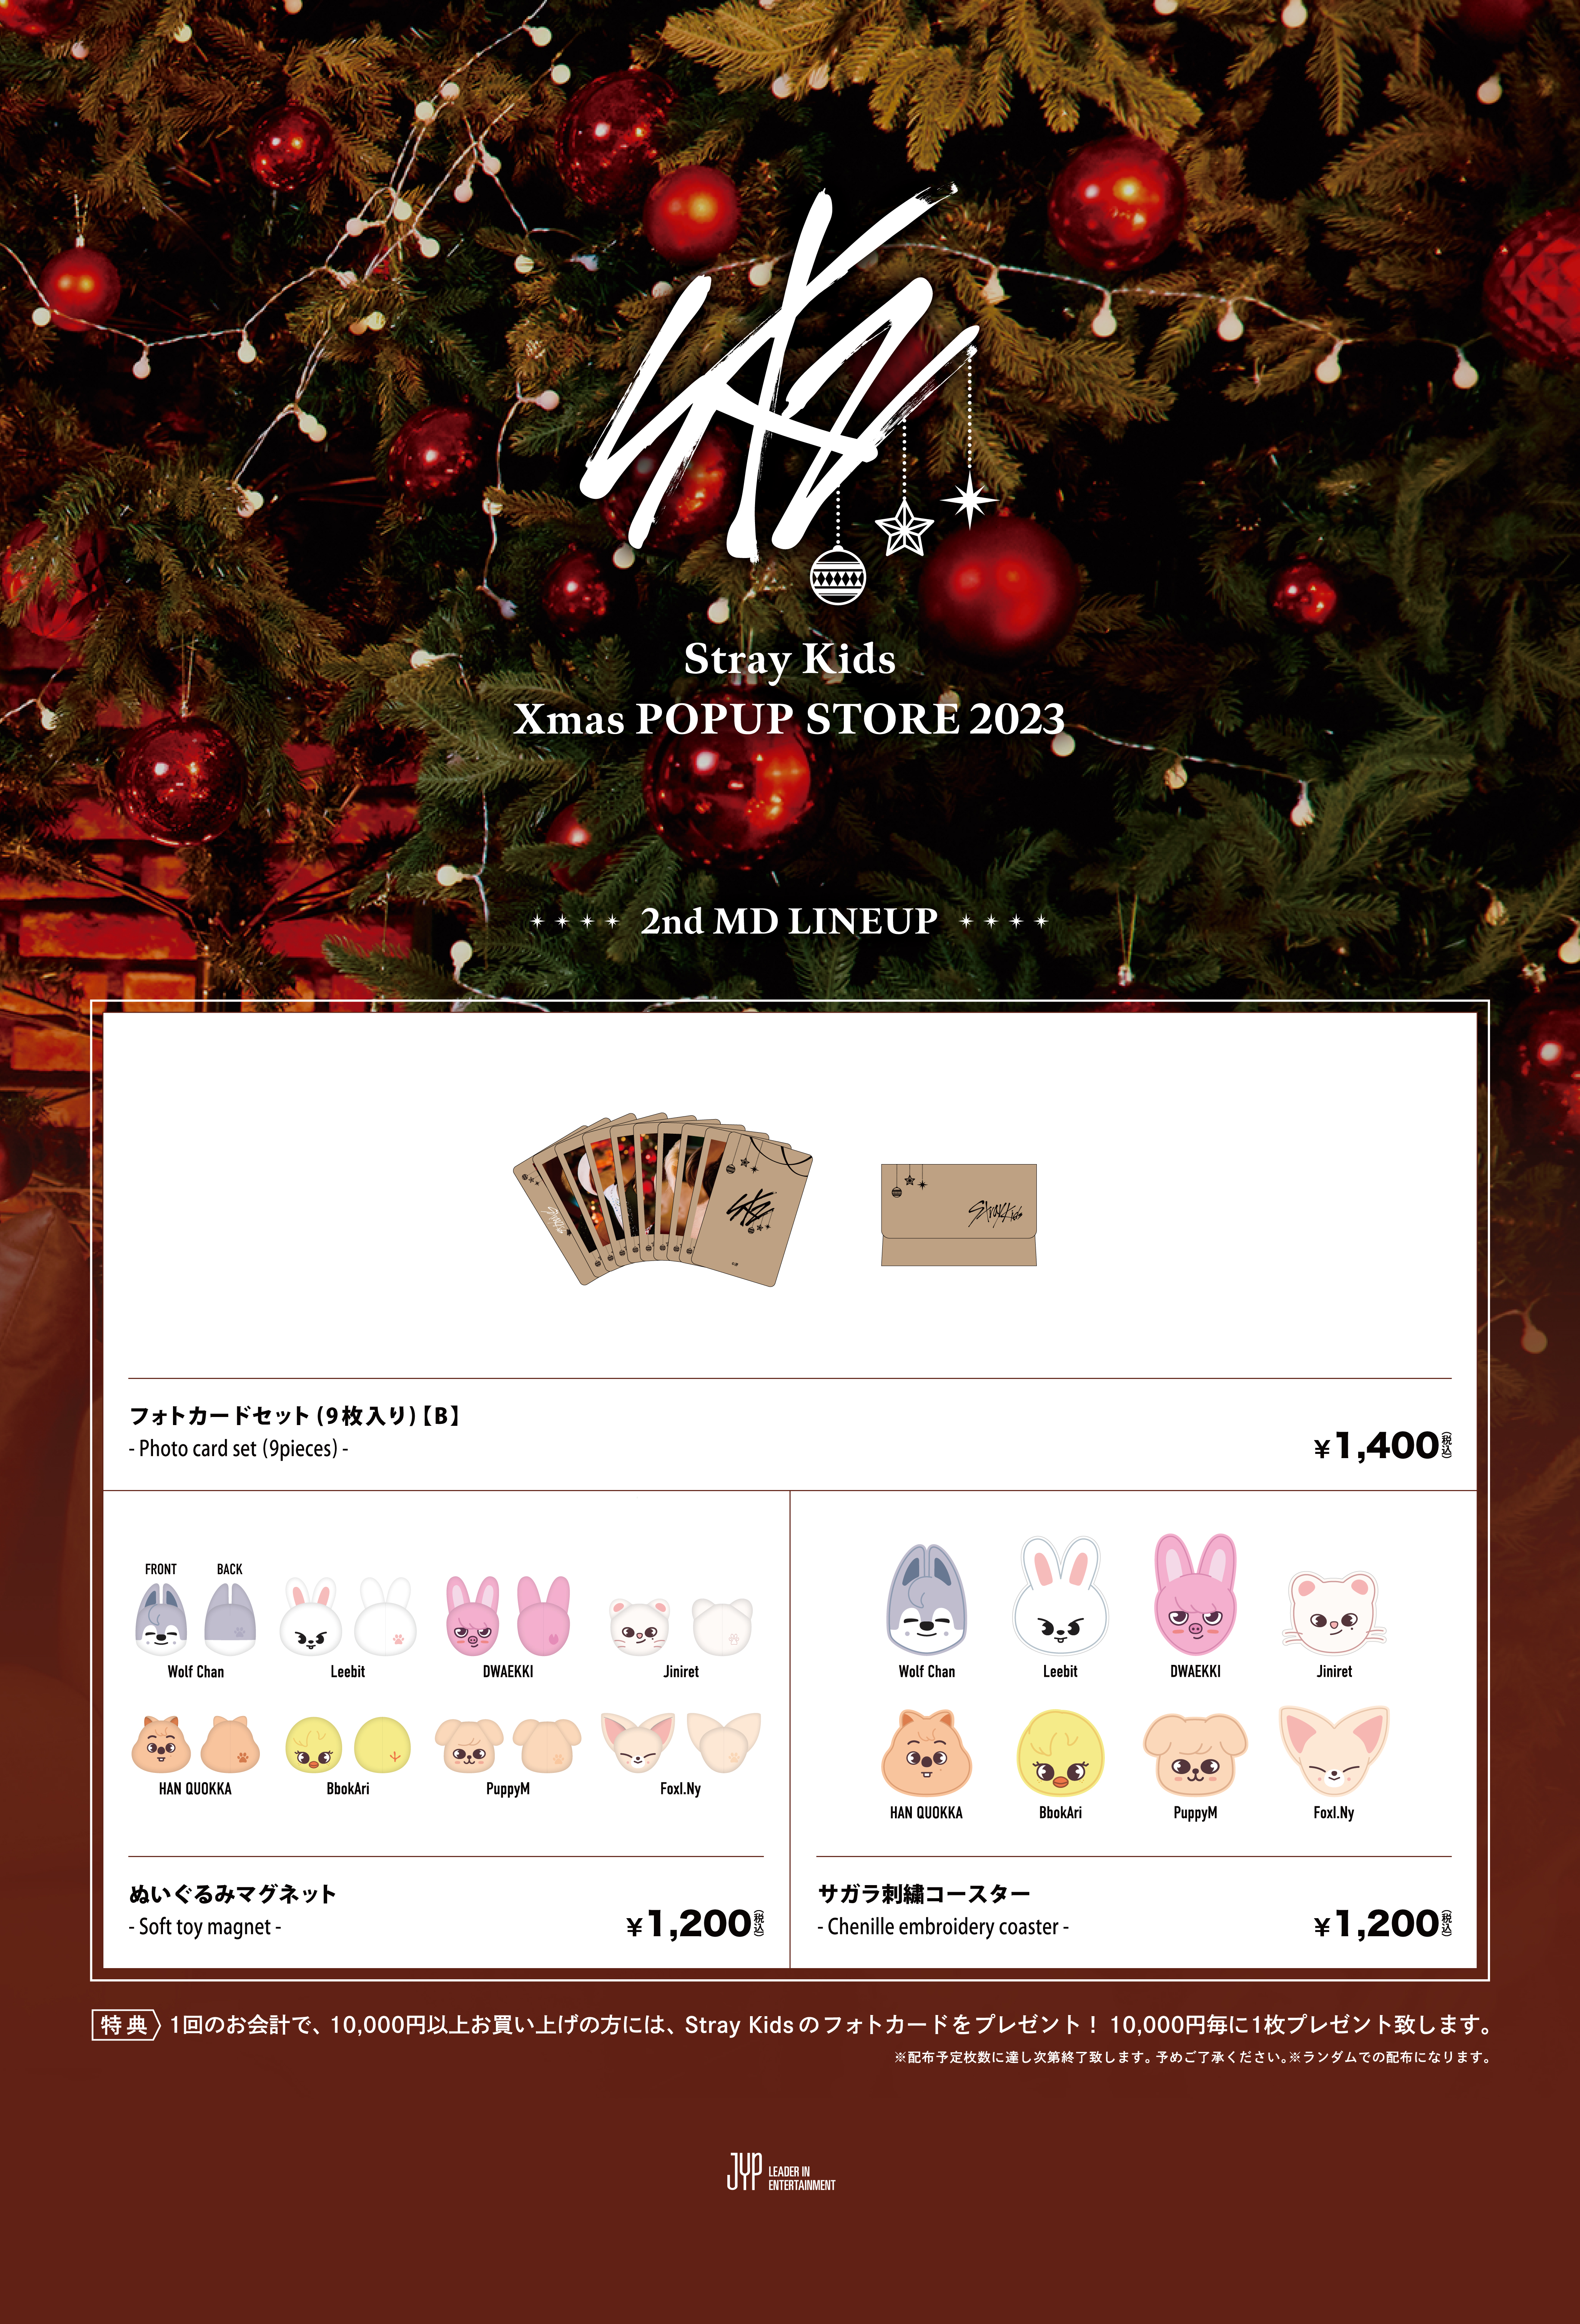 Stray Kids Xmas POPUP STORE 2023』オフィシャルグッズ2nd LINEUP通信 